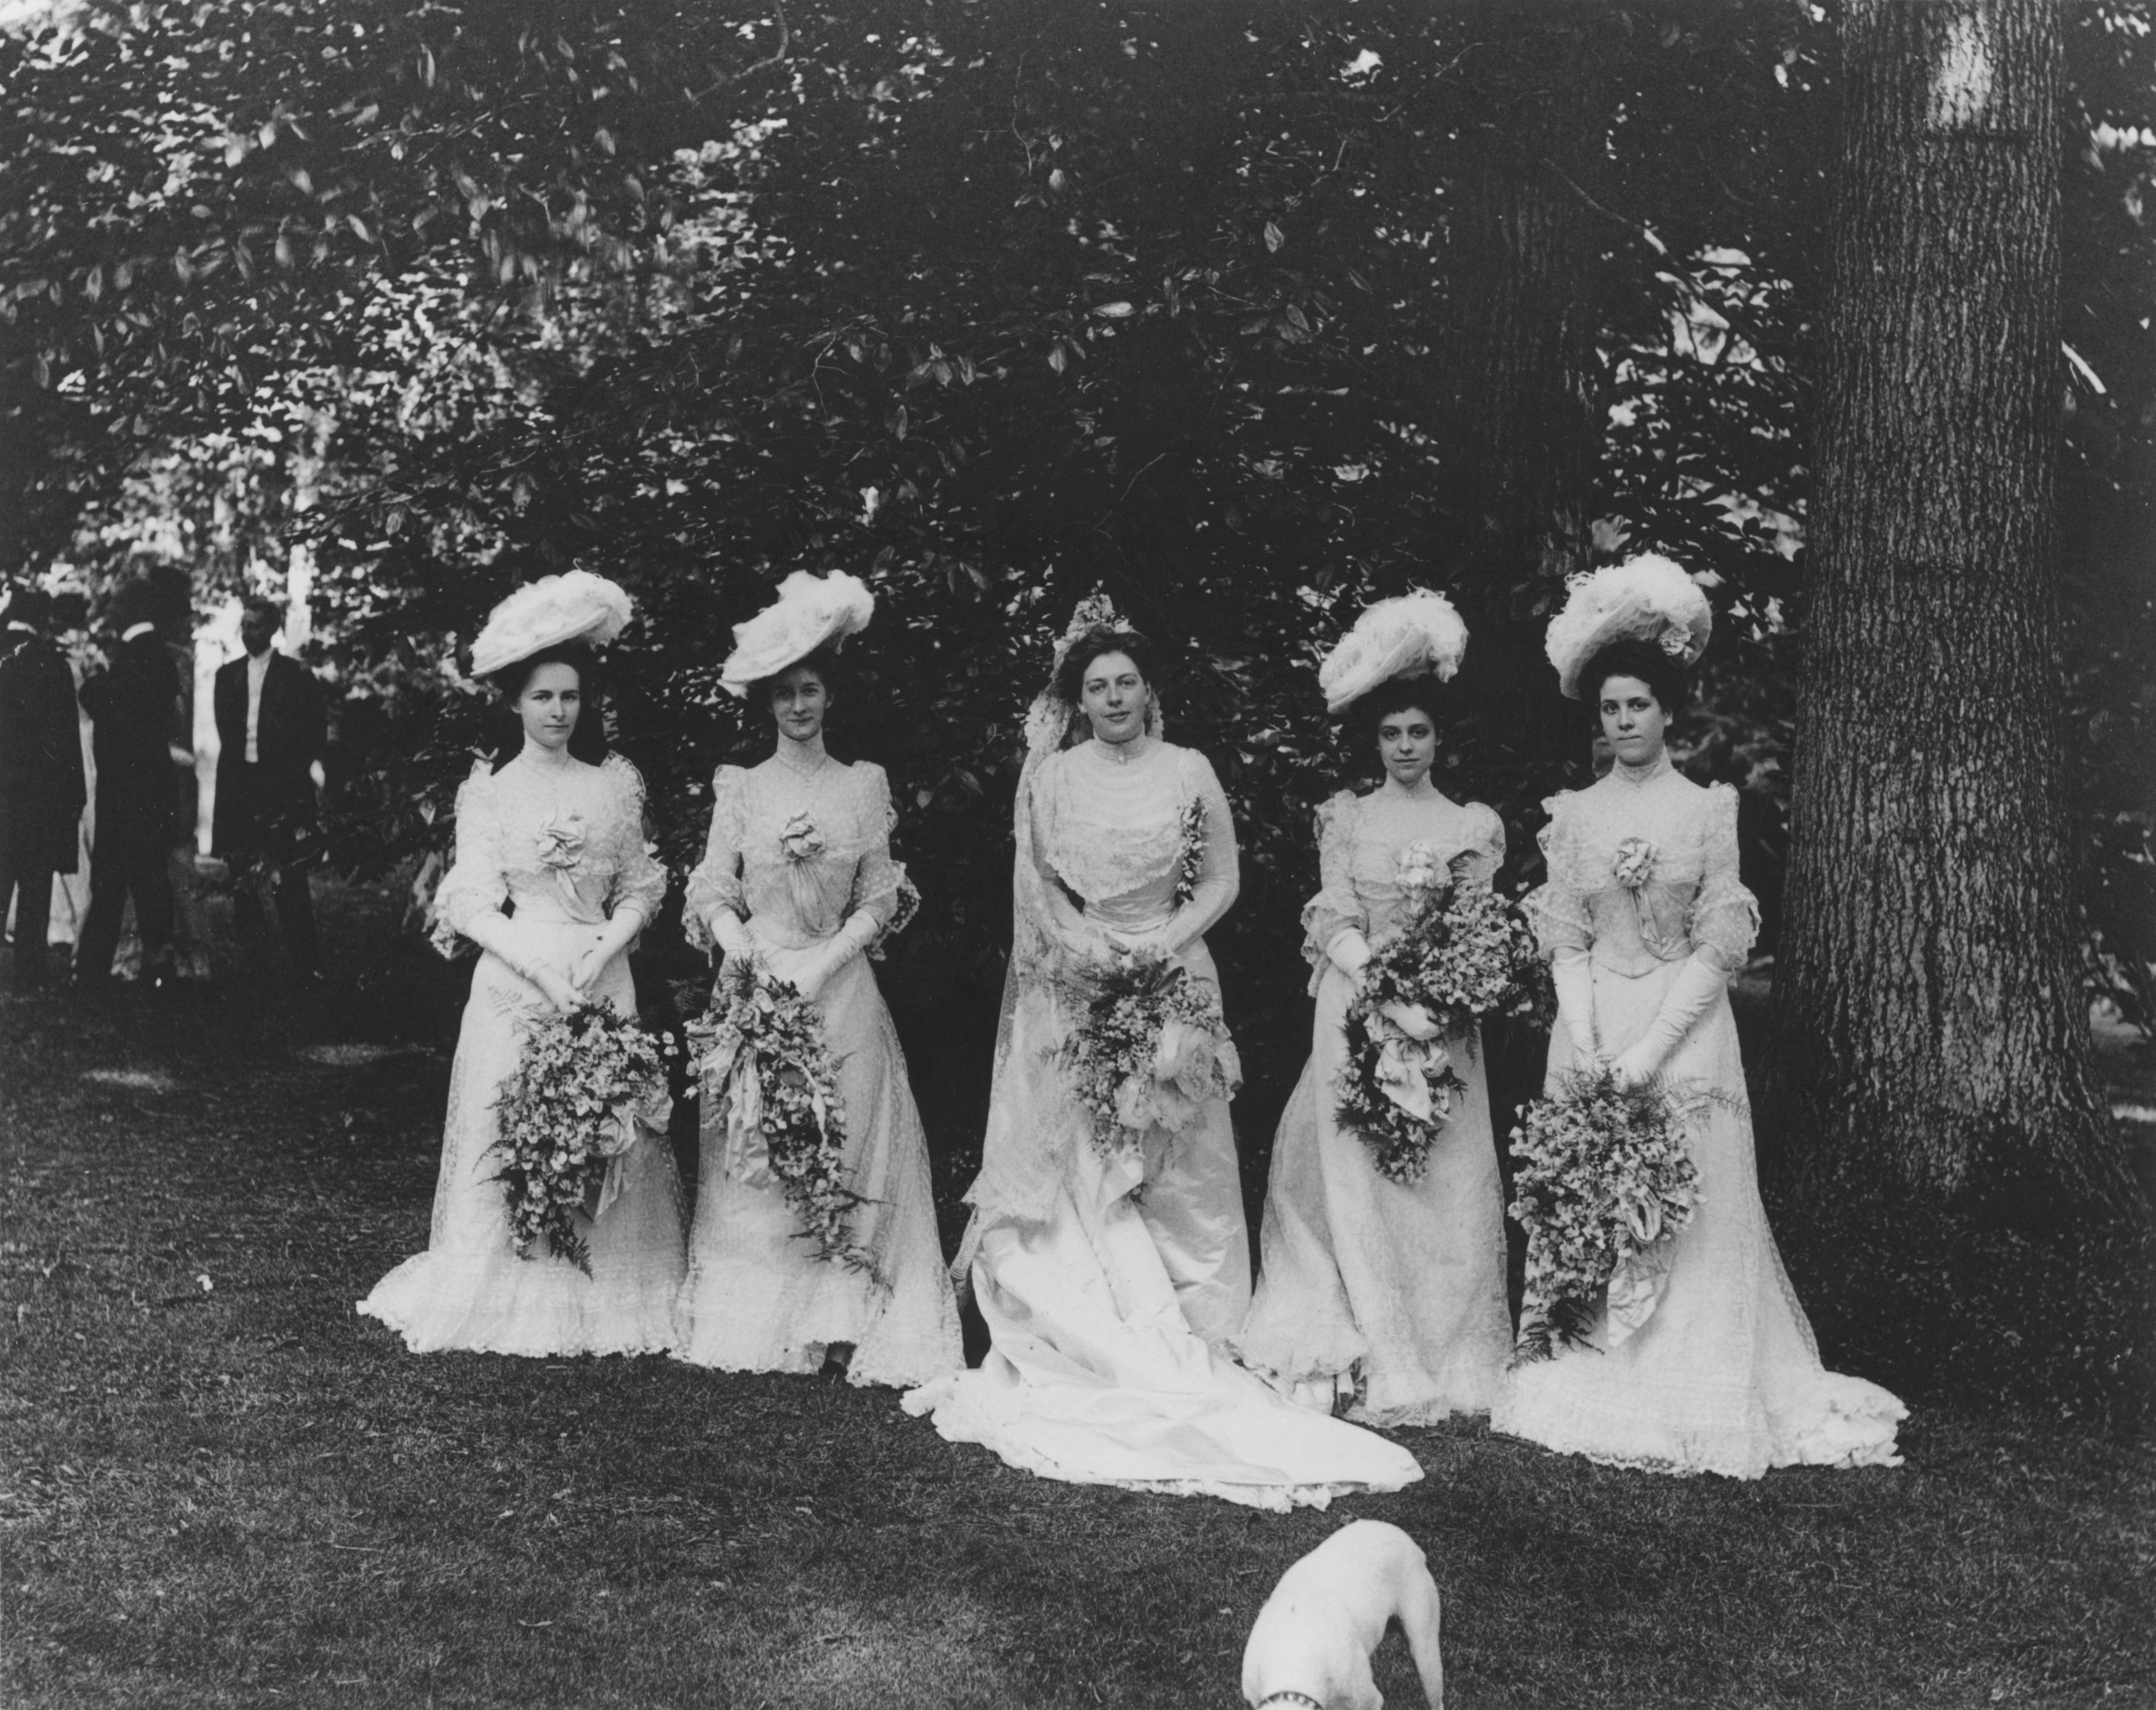 Black and white group photo of Louise du Pont Crowninshield on her wedding day with her bridesmaids.